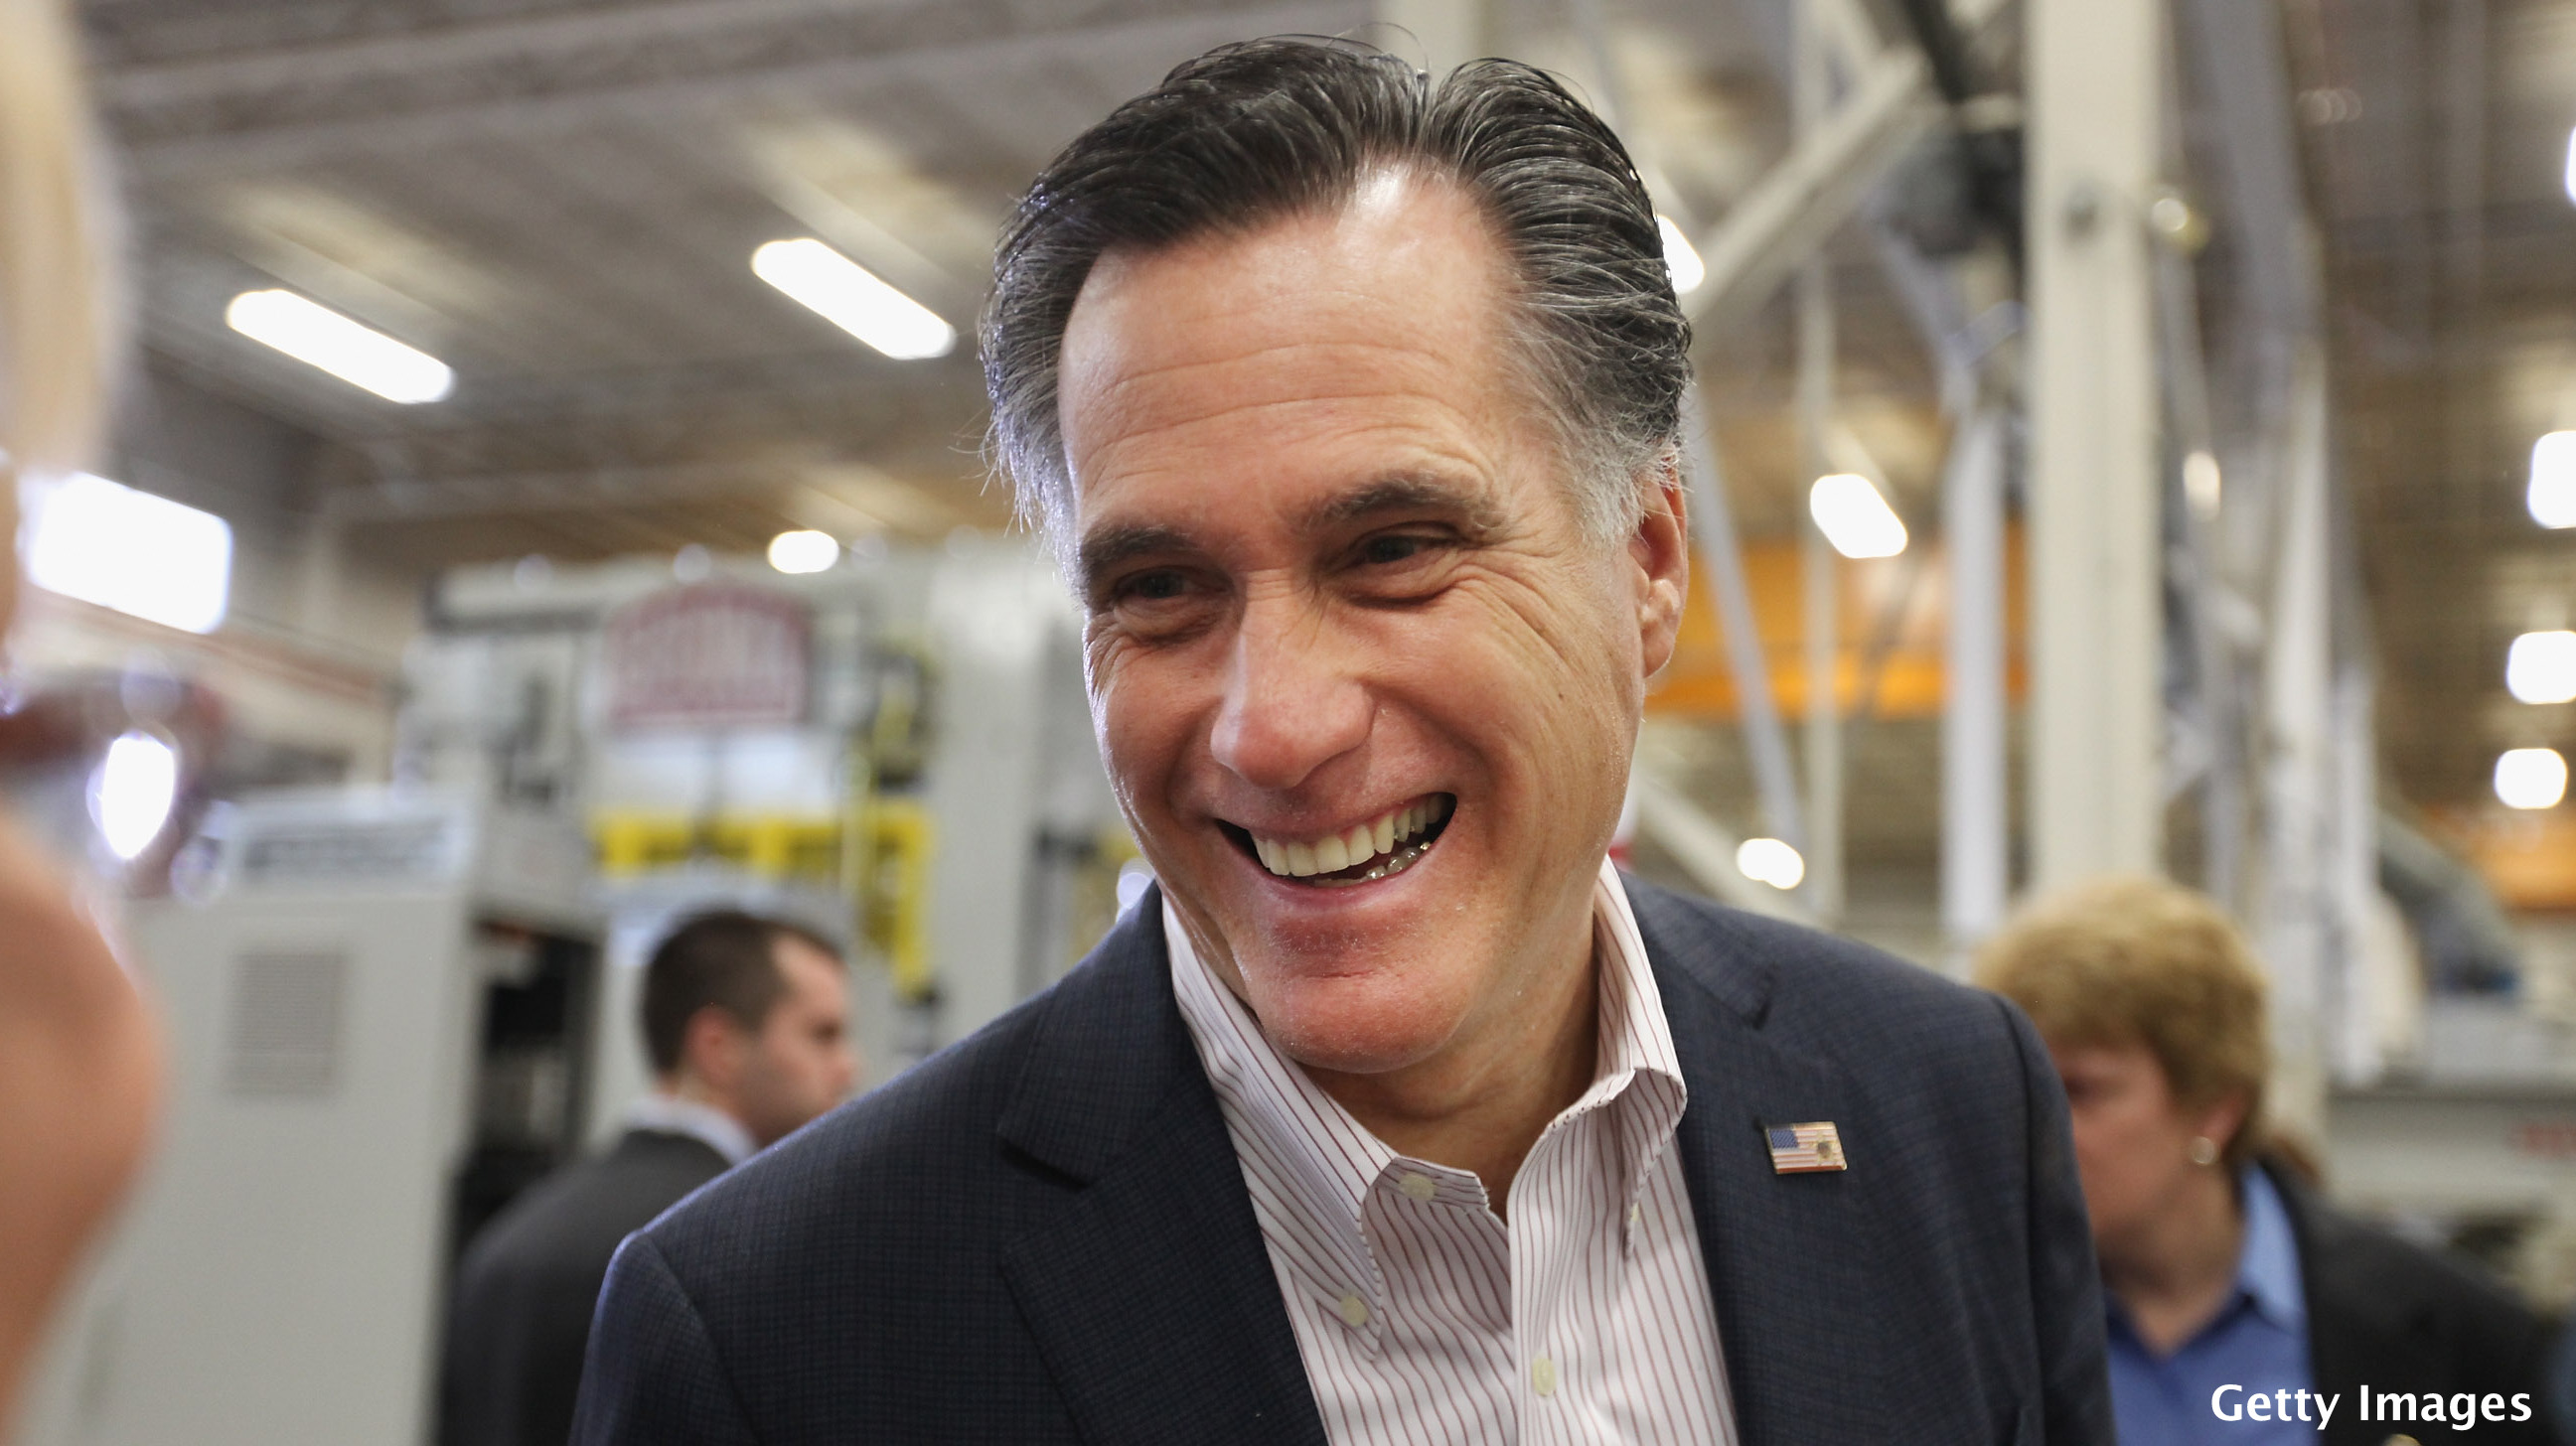 Romney wins California primary, CNN projects